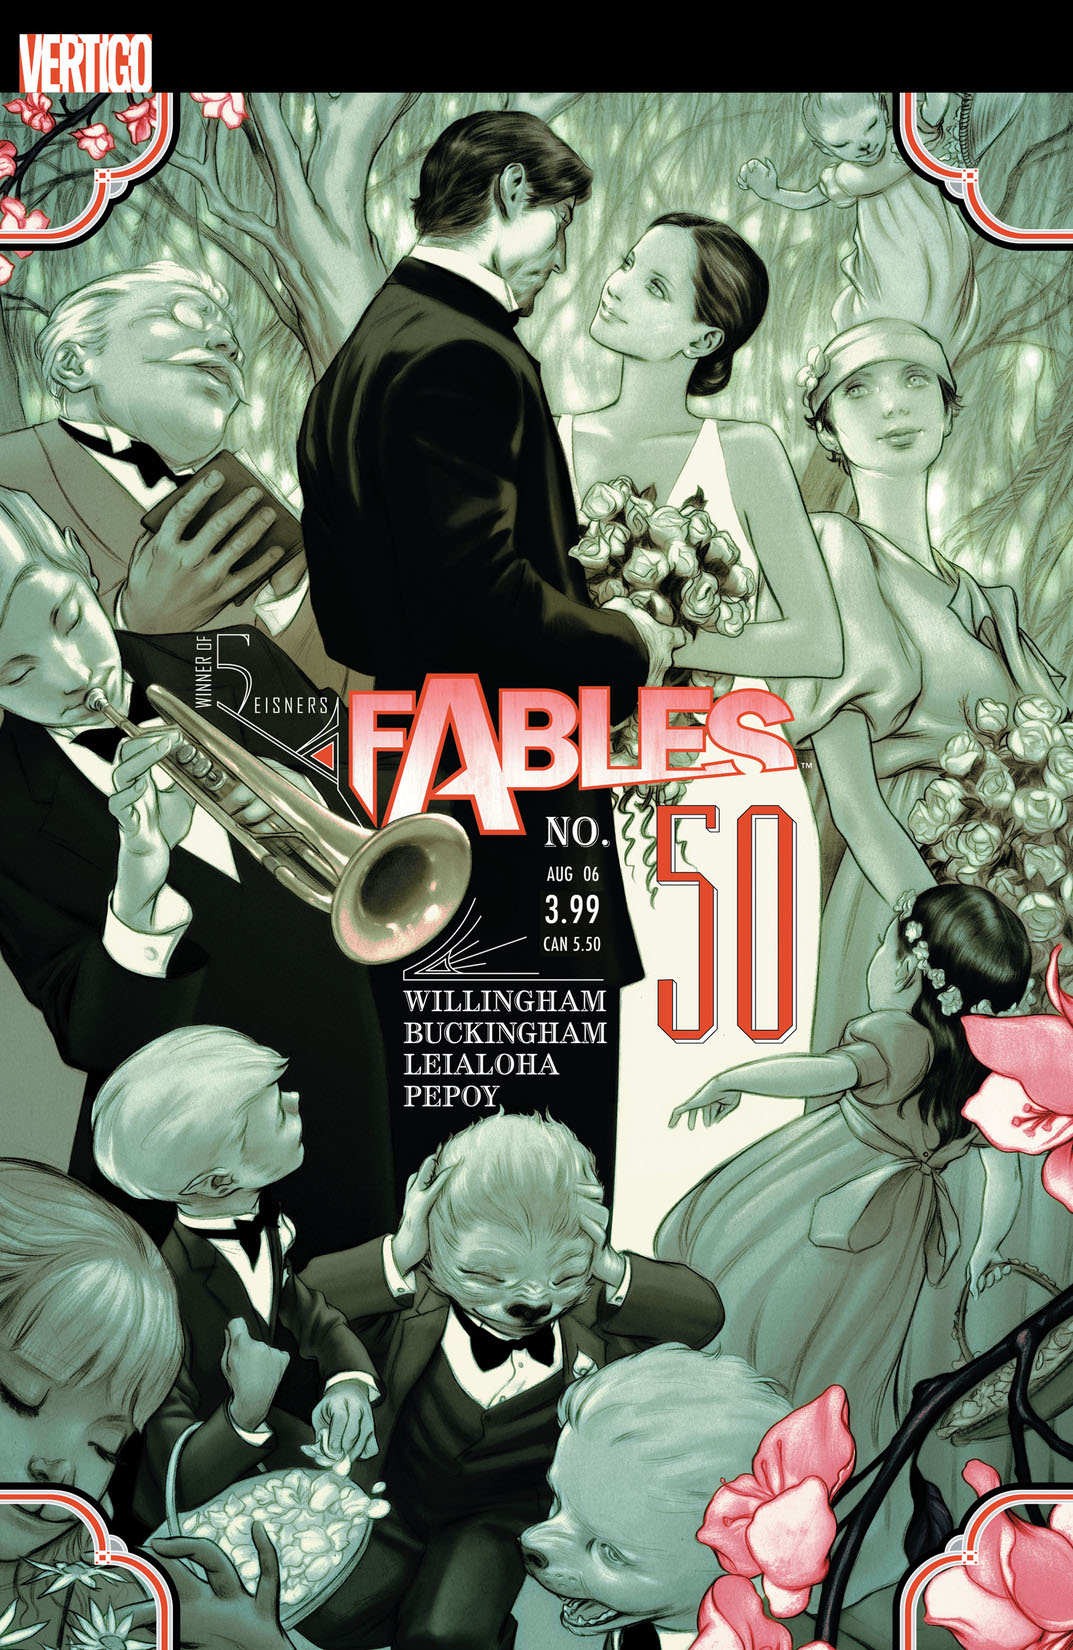 Fables #50 preview images